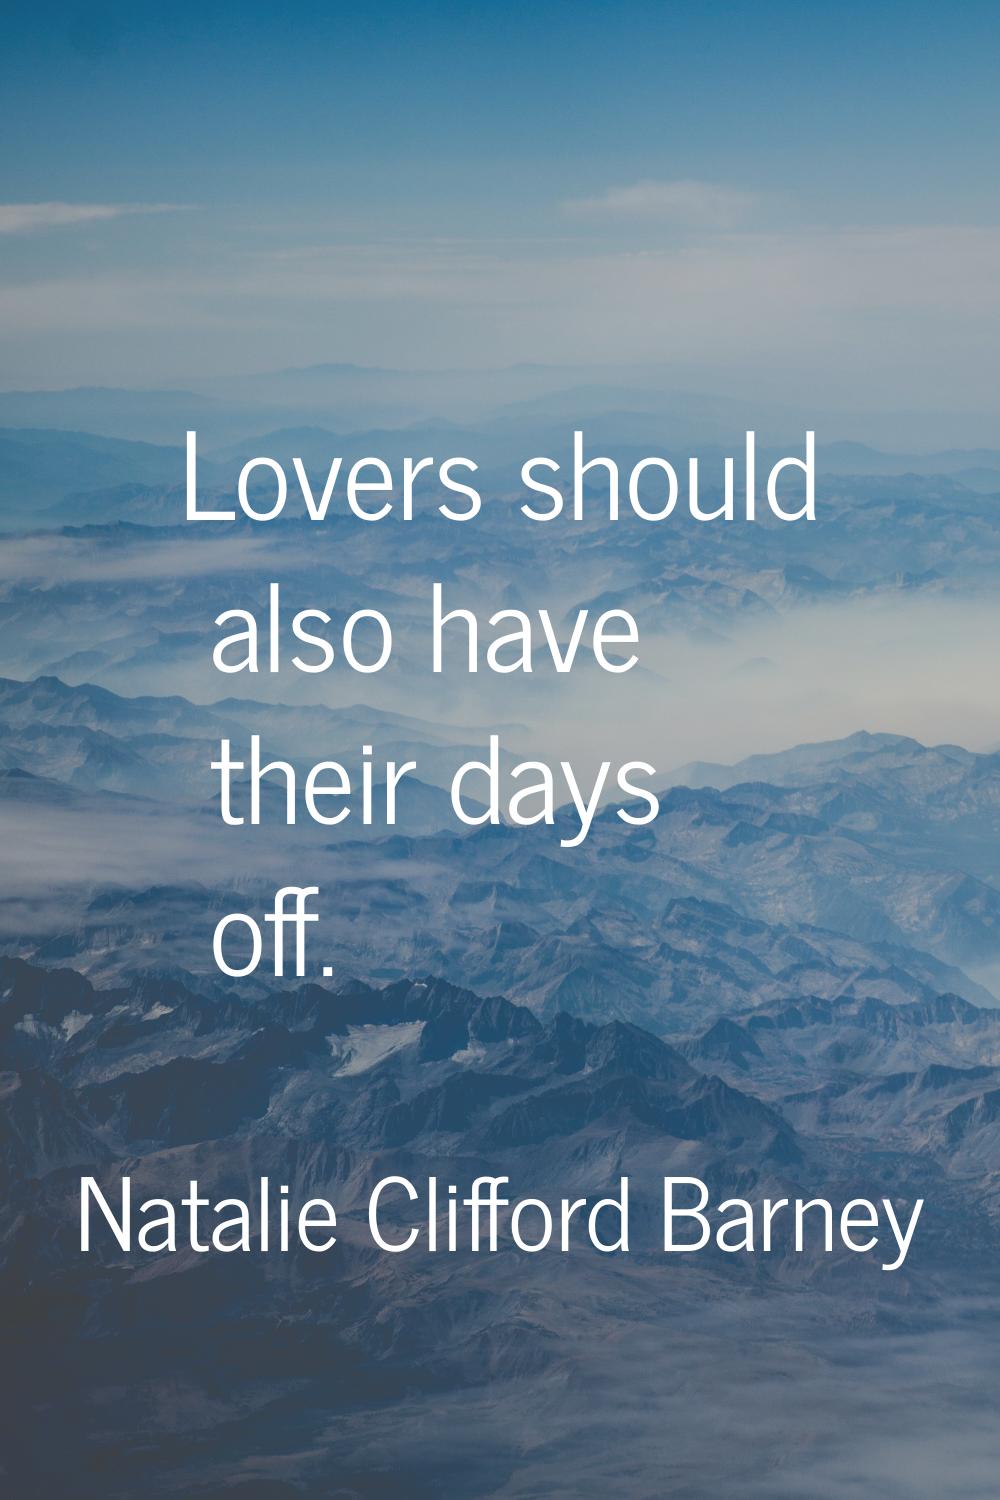 Lovers should also have their days off.